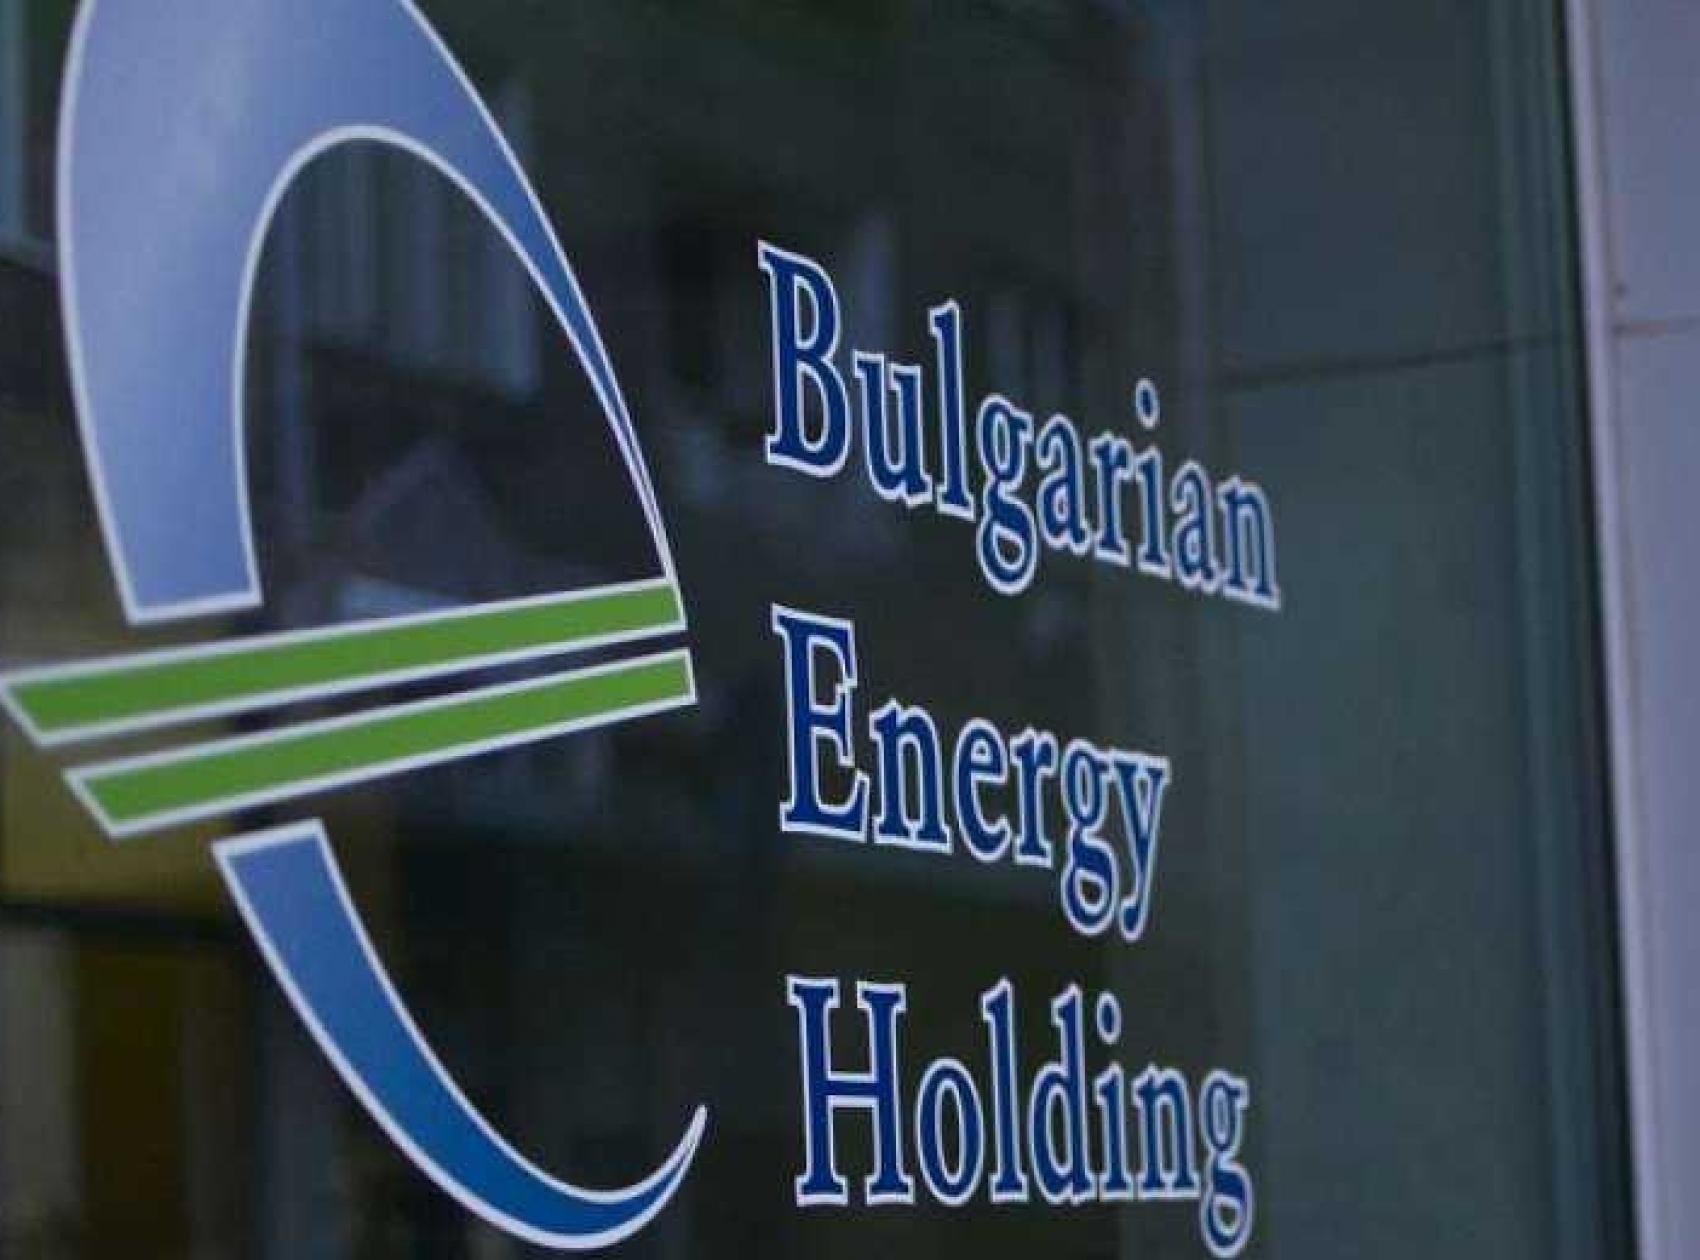 Fitch Ratings (Fitch) raised the credit rating of Bulgarian Energy